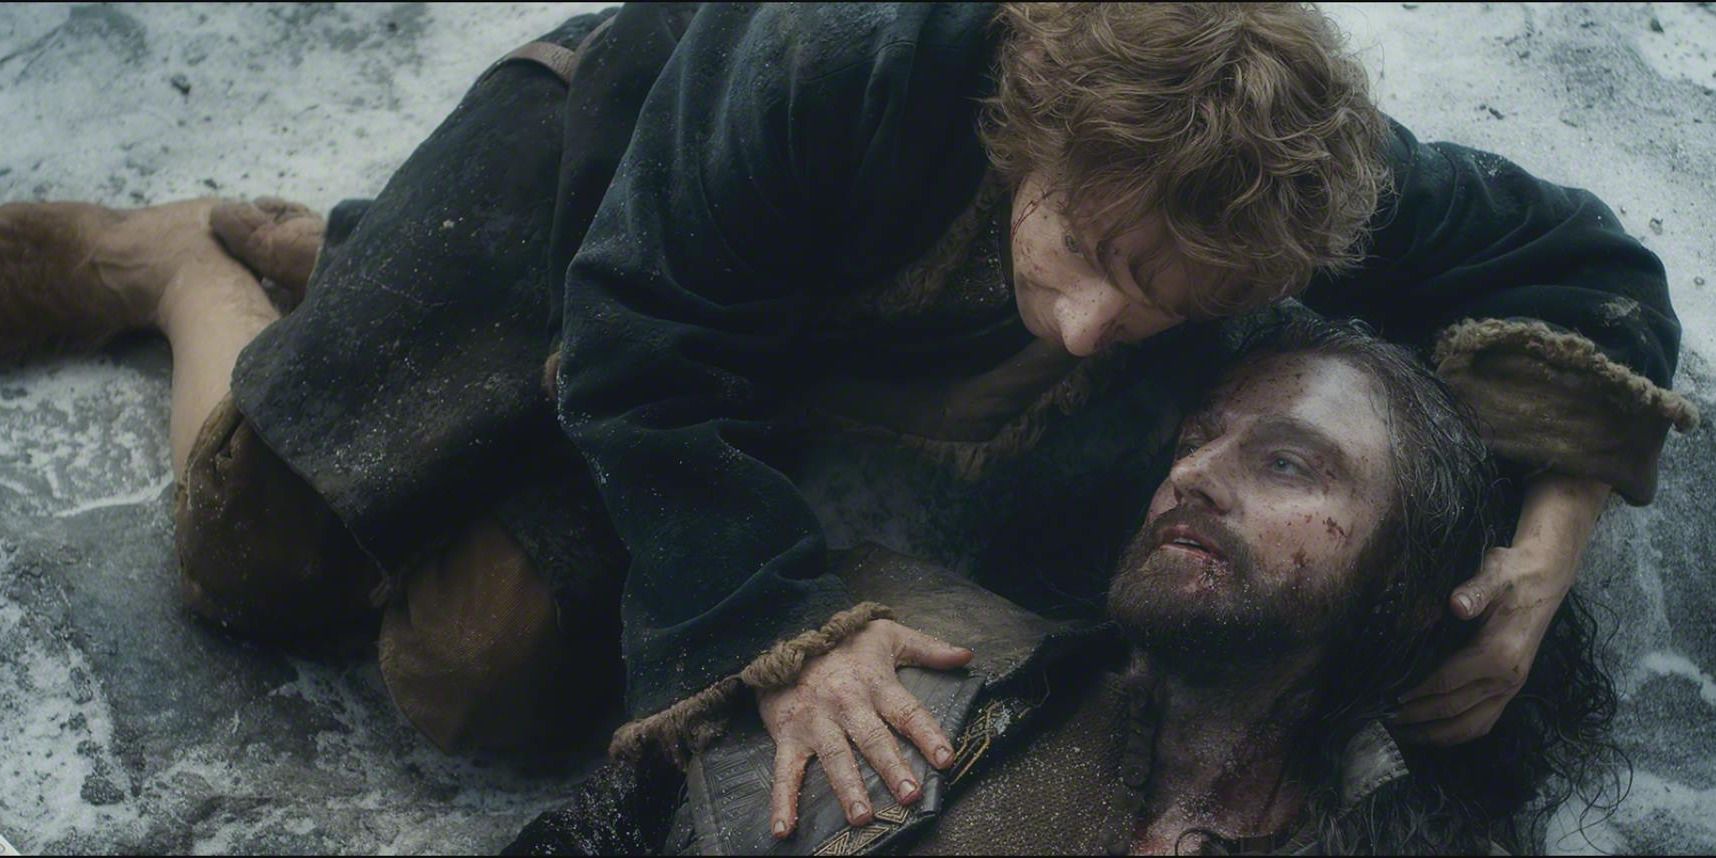 Bilbo holding a dying Thorin in 'The Hobbit: The Battle of the Five Armies'